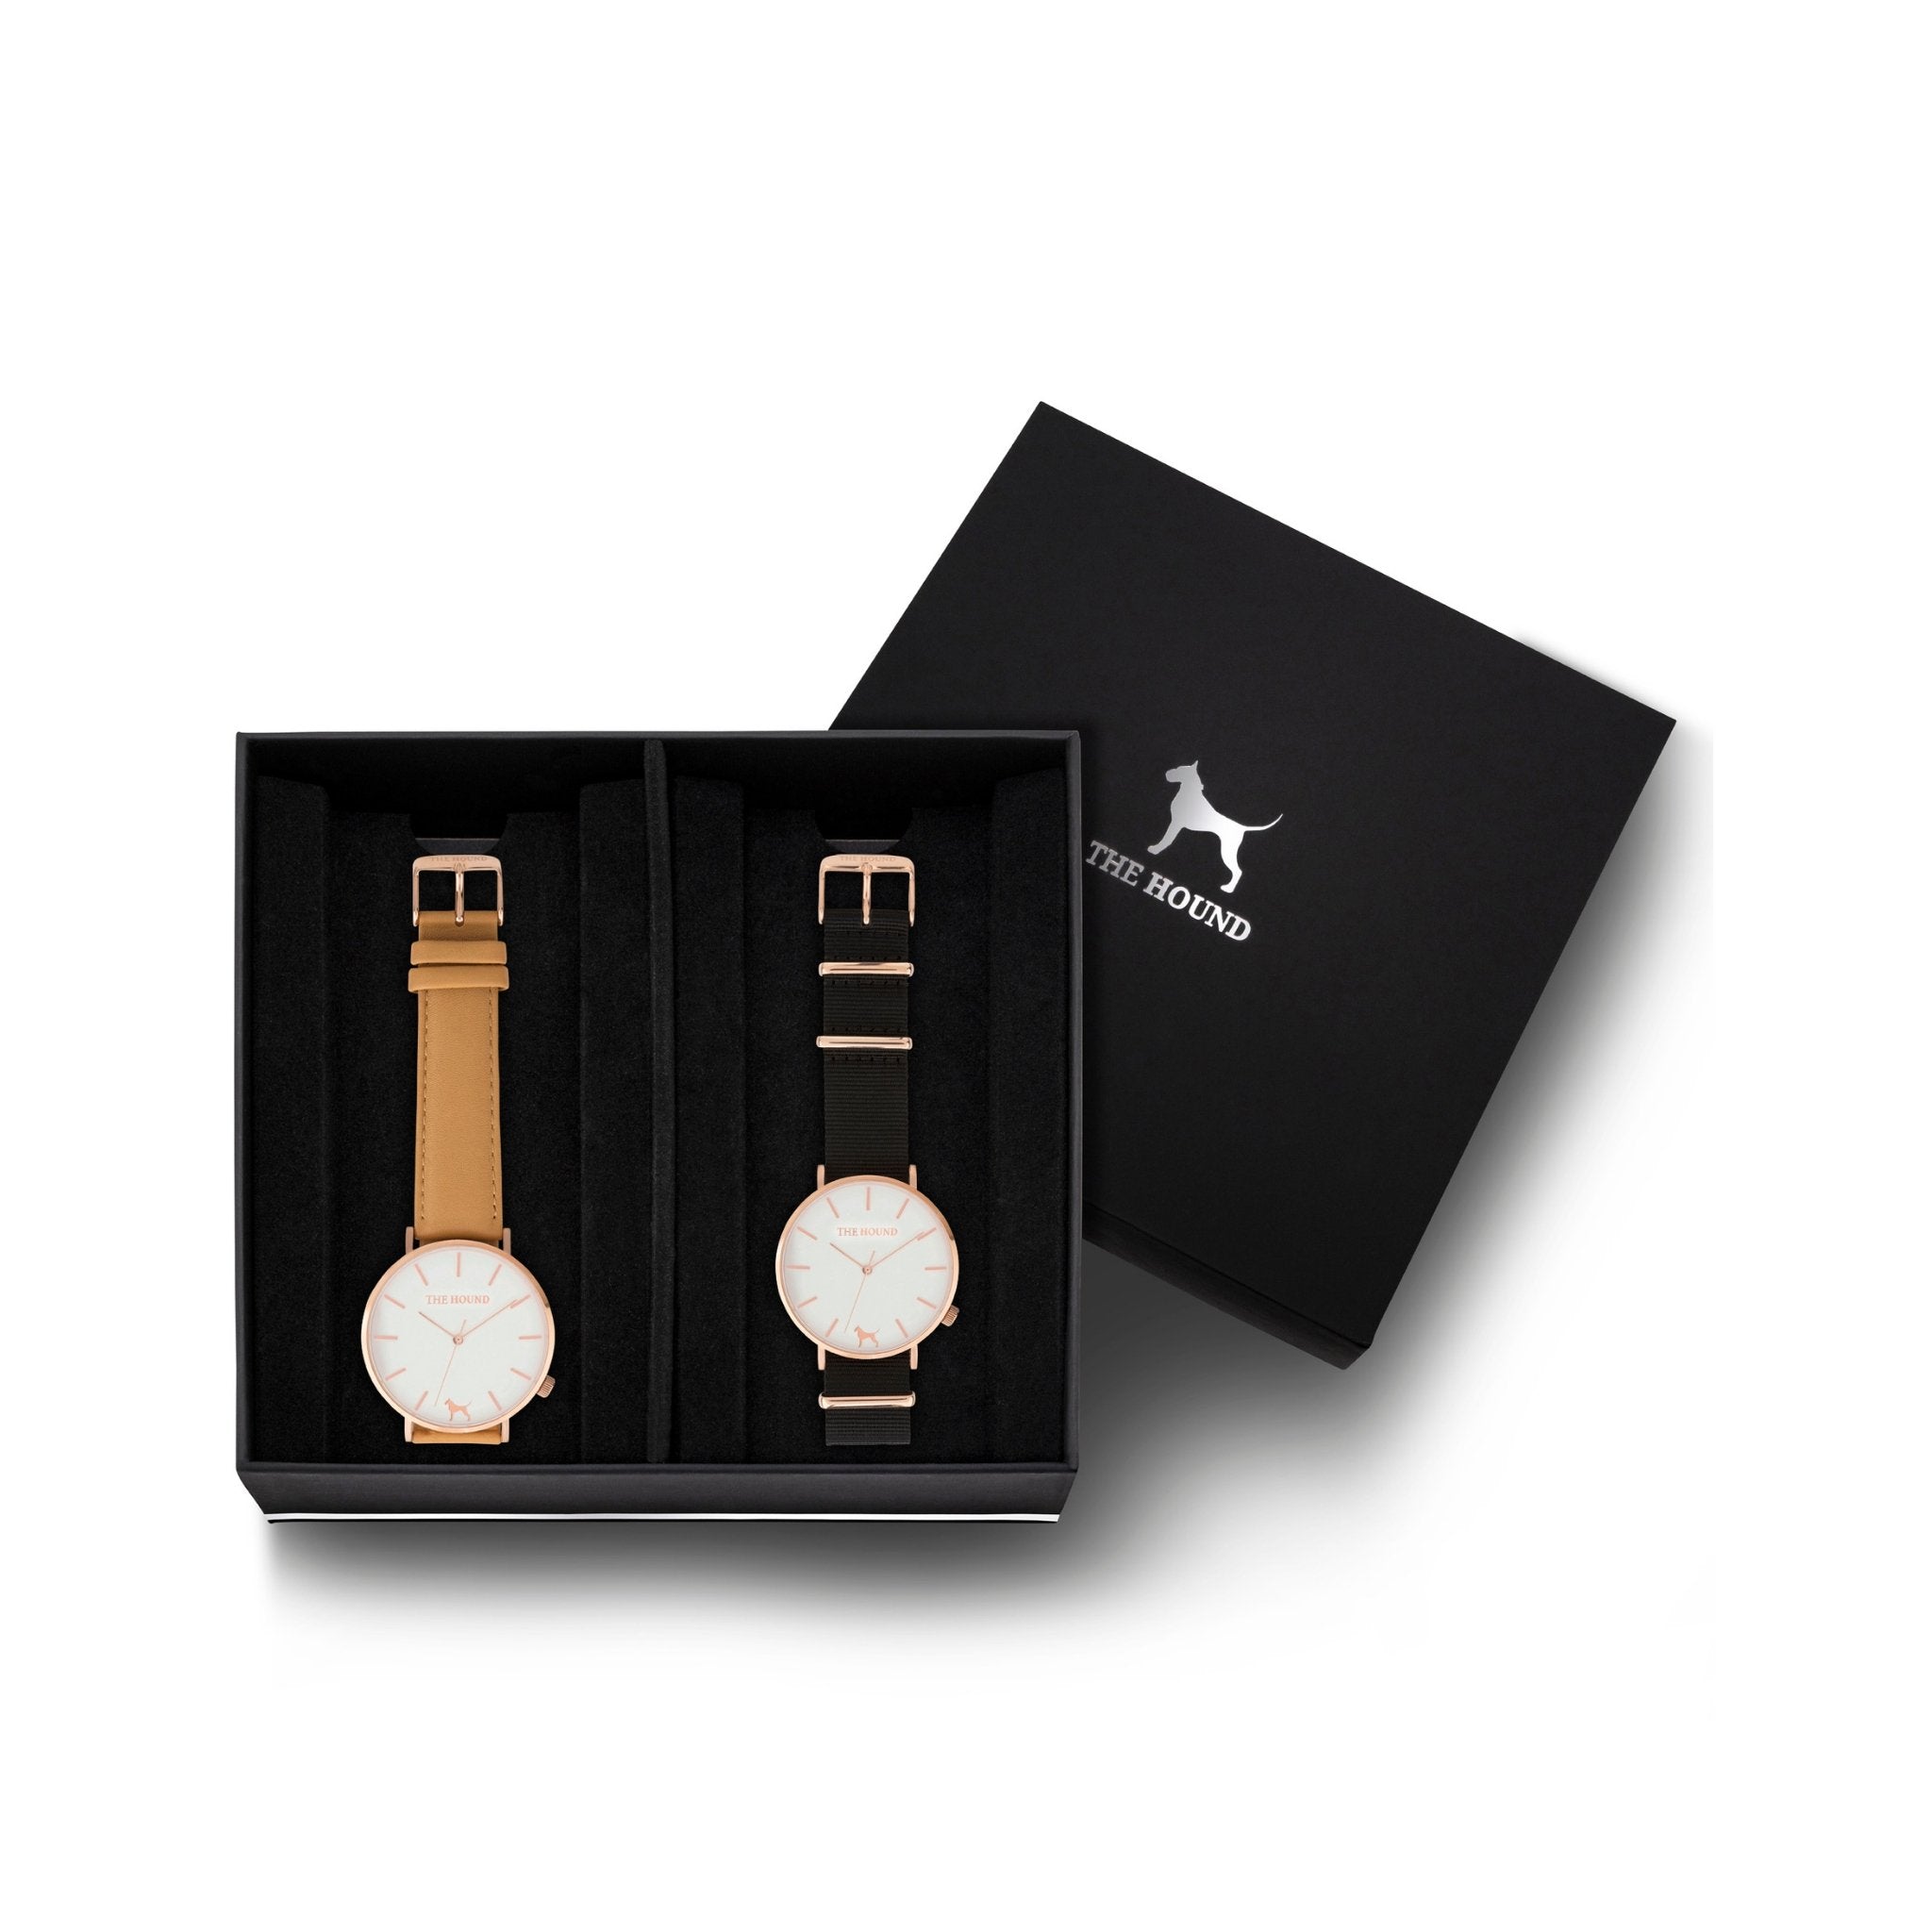 Custom gift set - Rose gold and white watch with stitched camel genuine leather band and a rose gold and white watch with black nato leather band